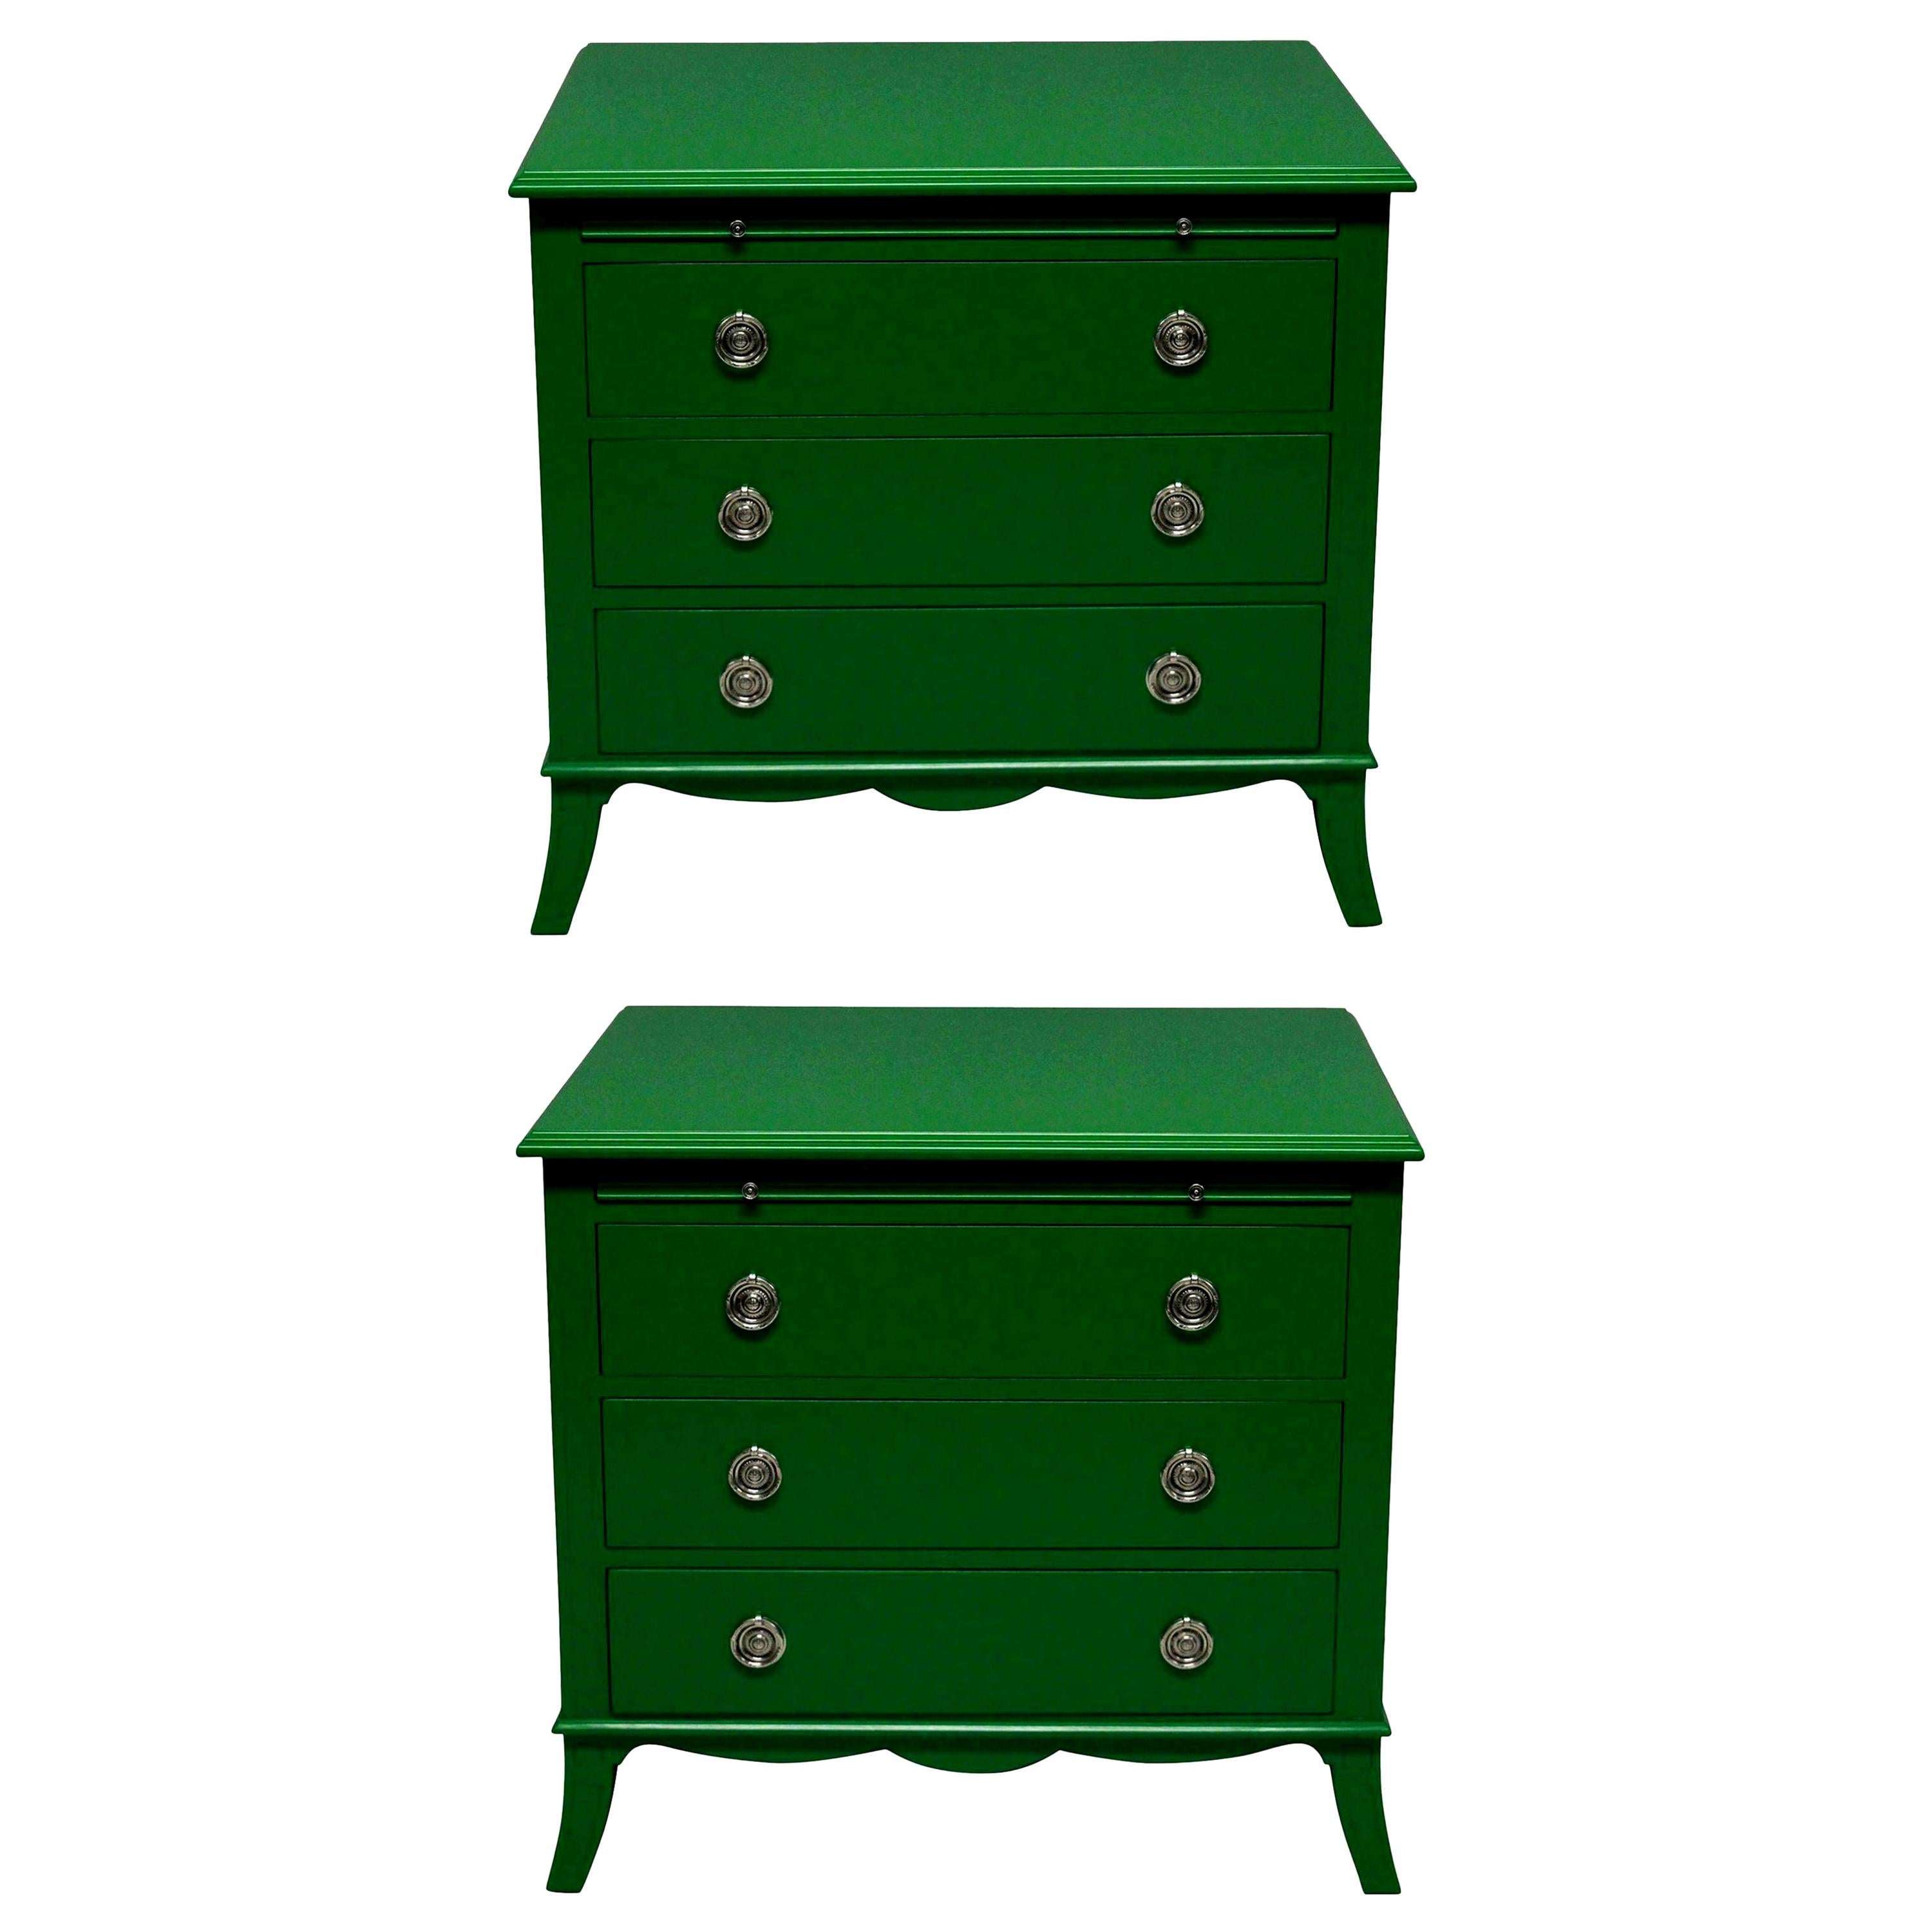 Pair of Emerald Green Lacquered Chests in the Manner of Dorothy Draper